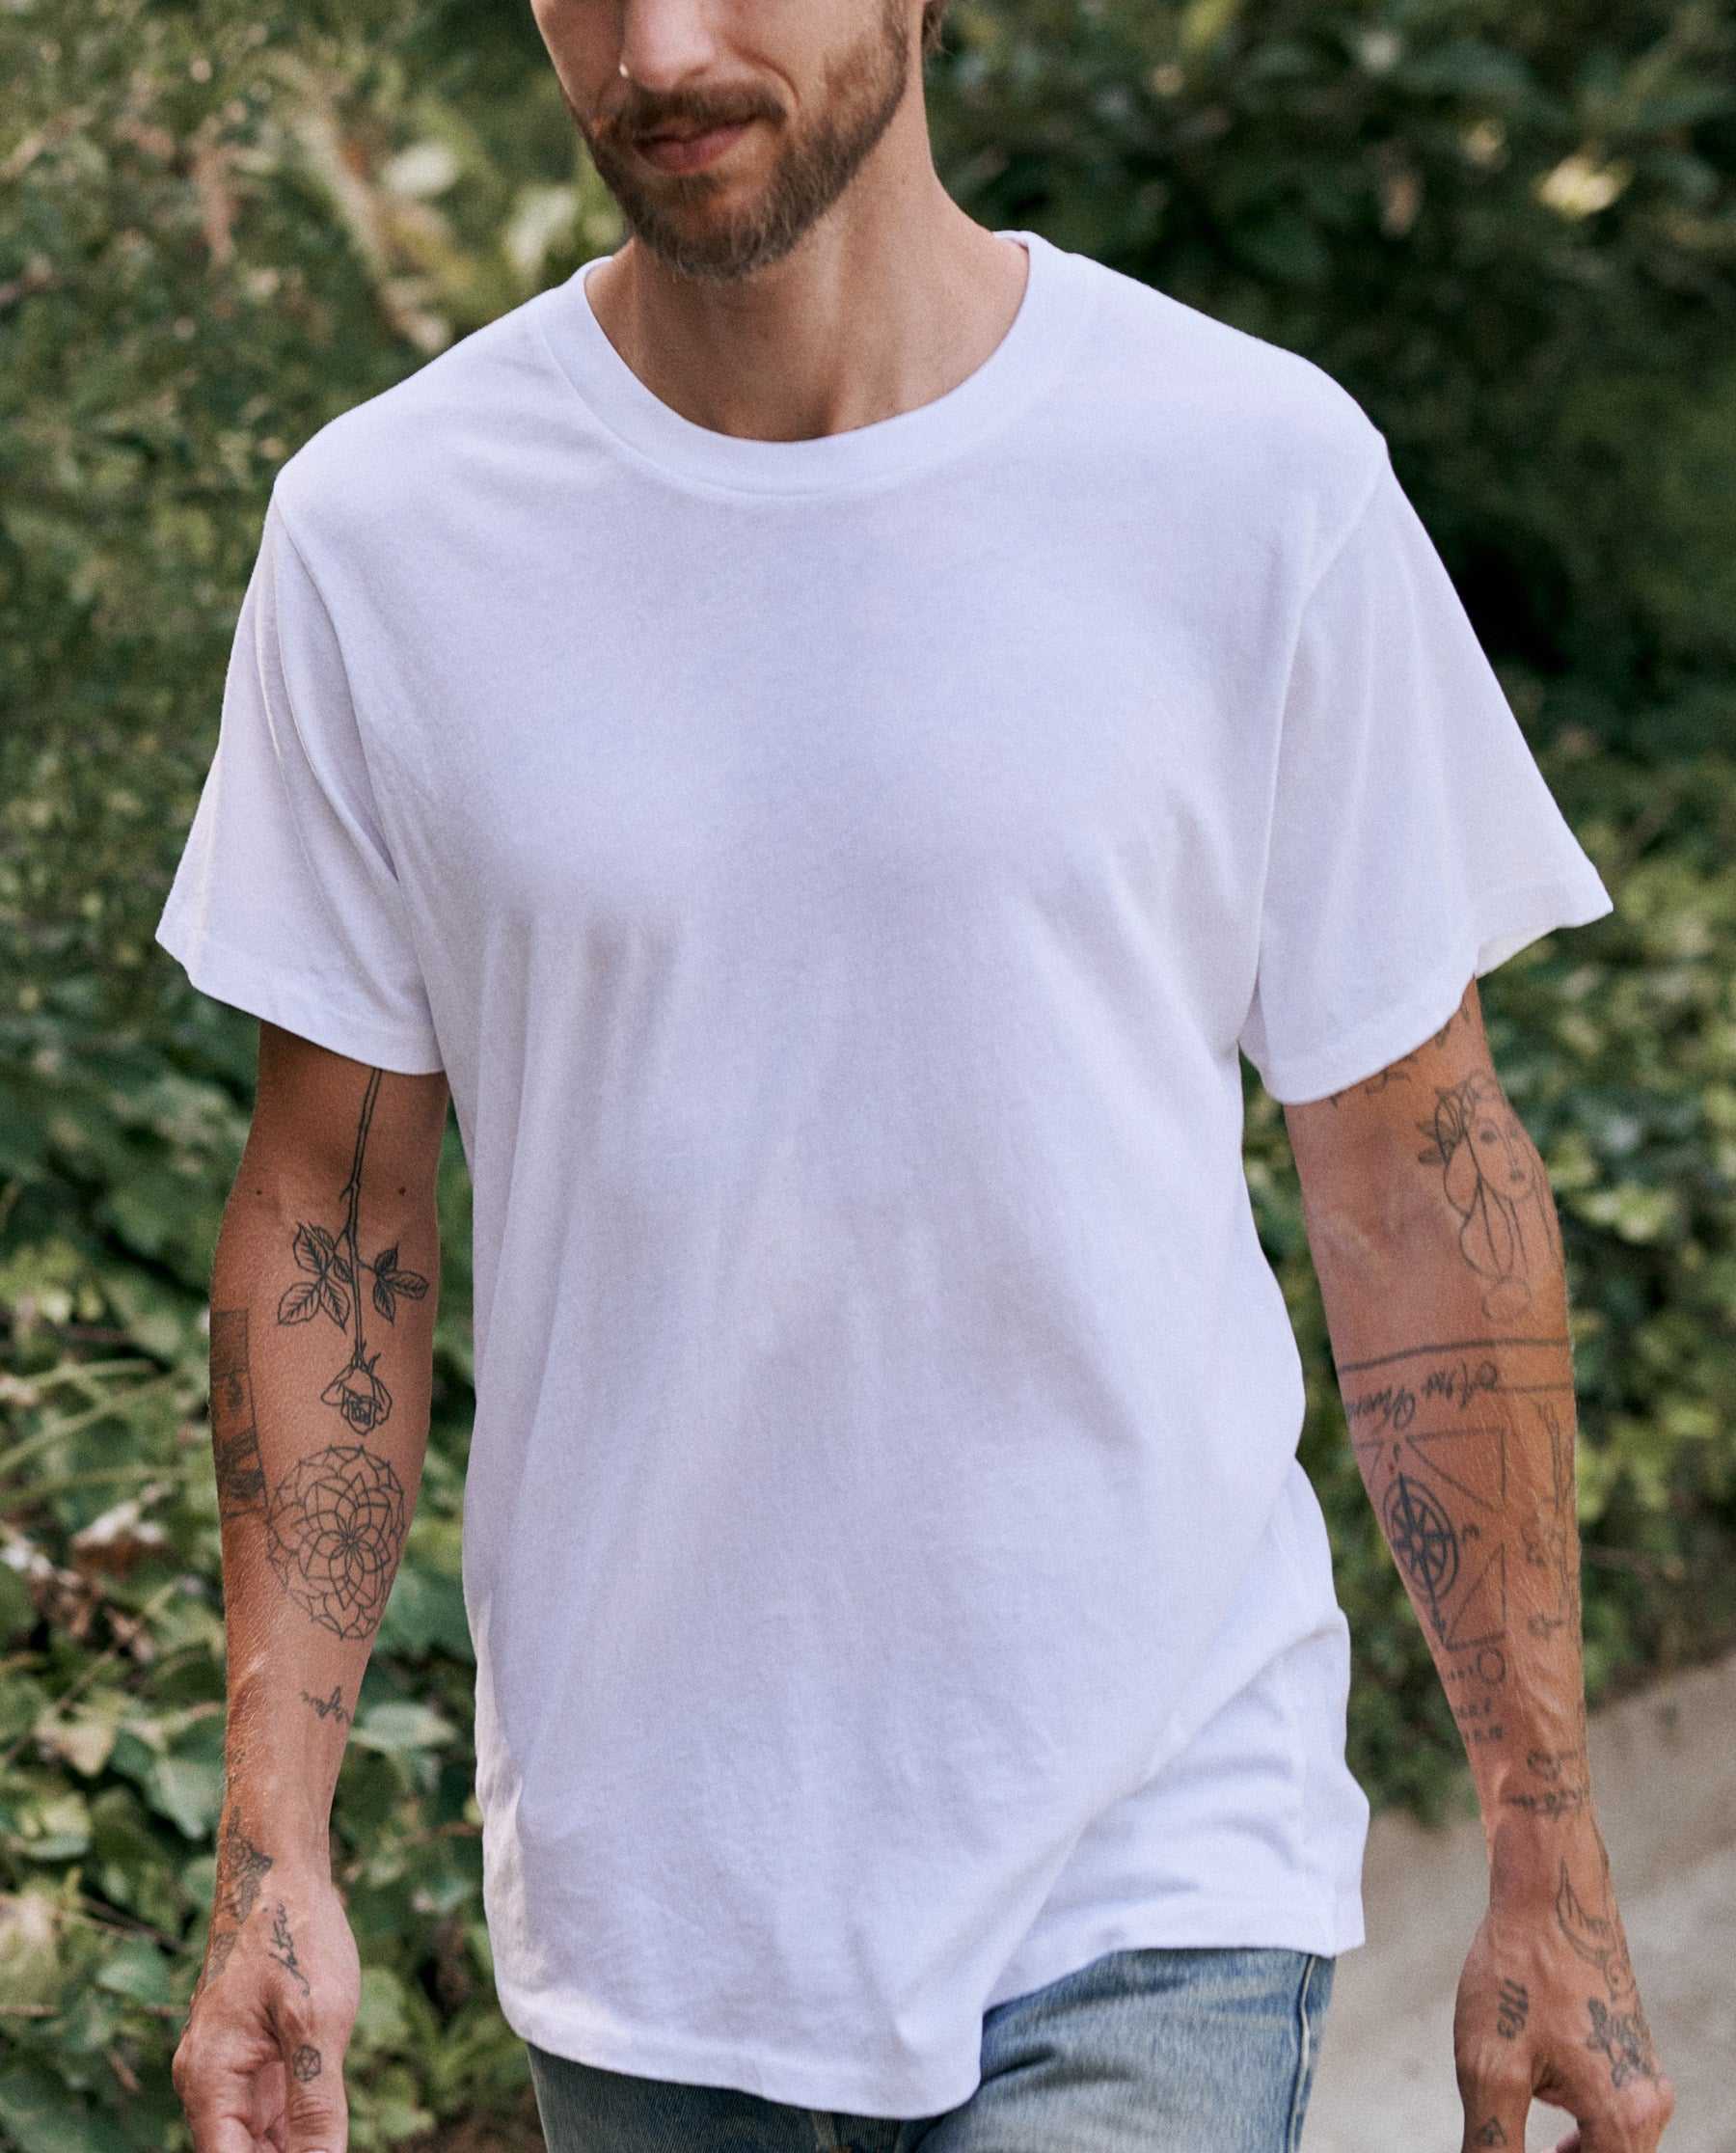 Best White T Shirts for Men, Tested and Reviewed